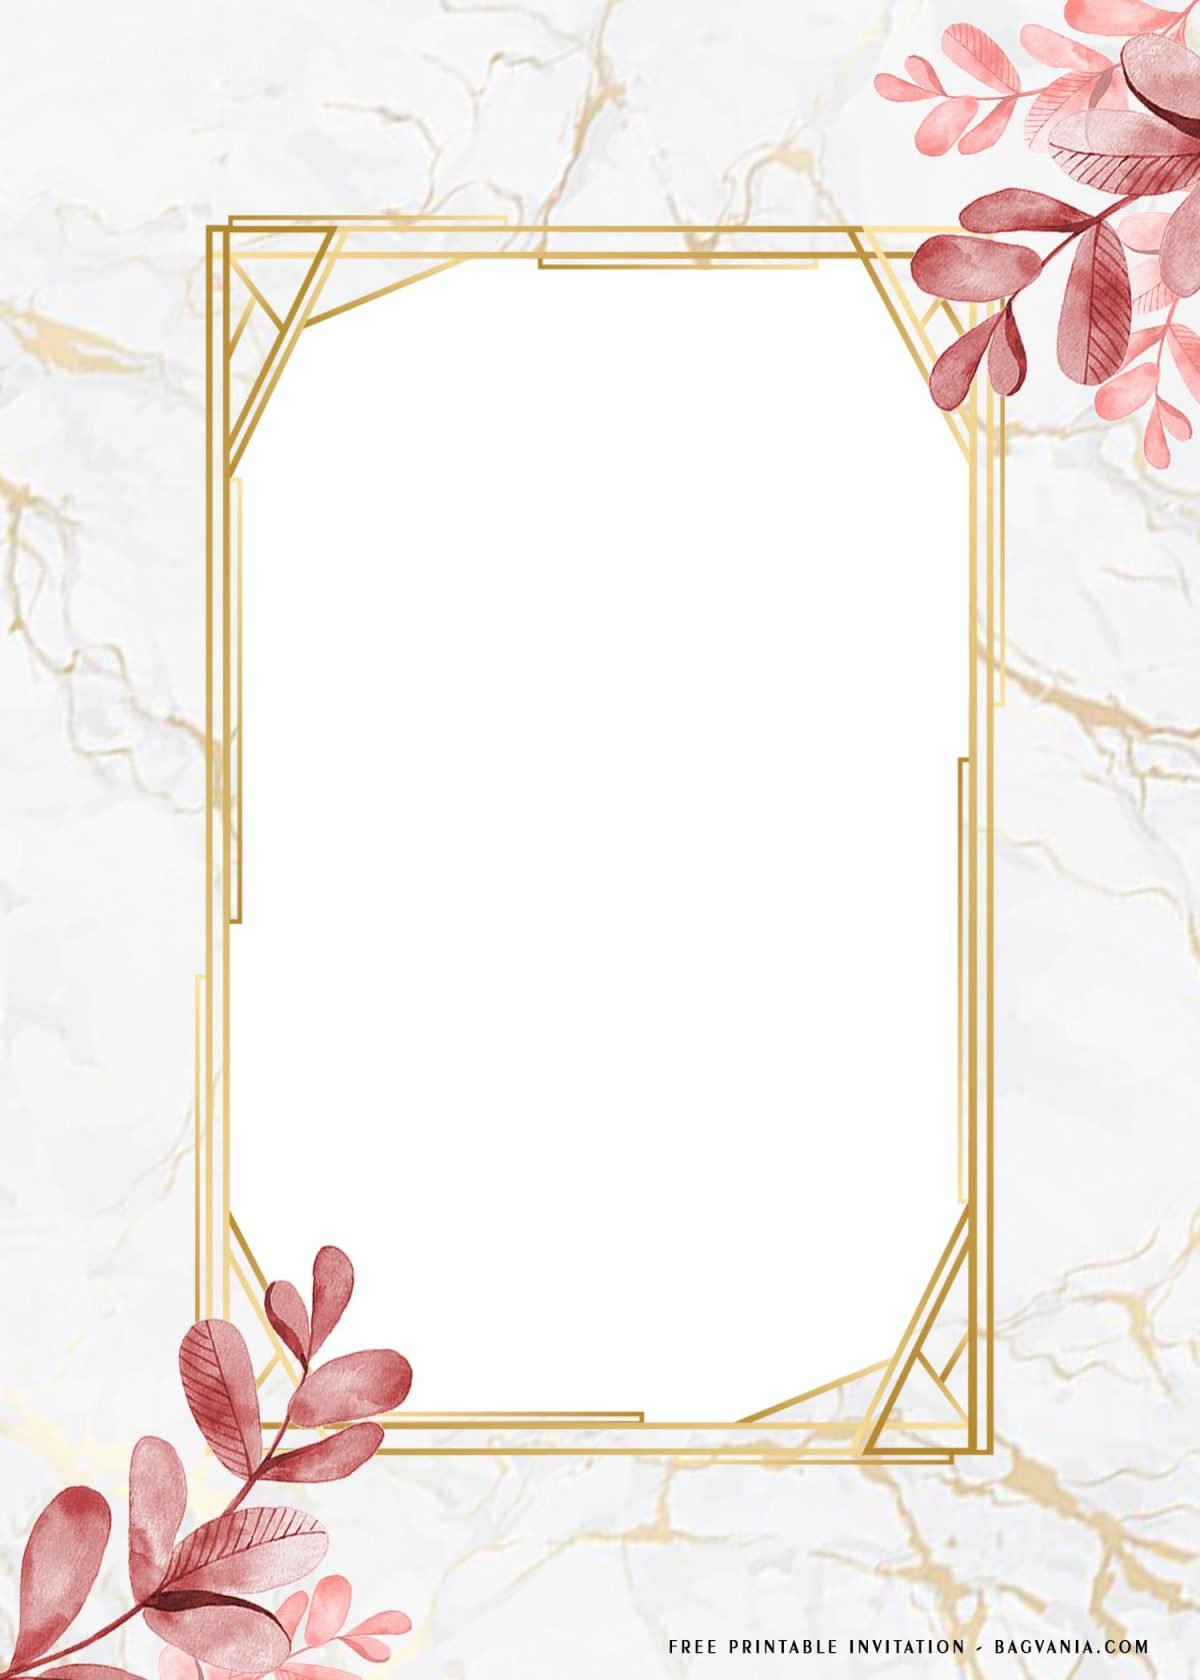 Free Printable Leafy Golden Frame Birthday Invitation Templates With Gold Rectangle Text Box